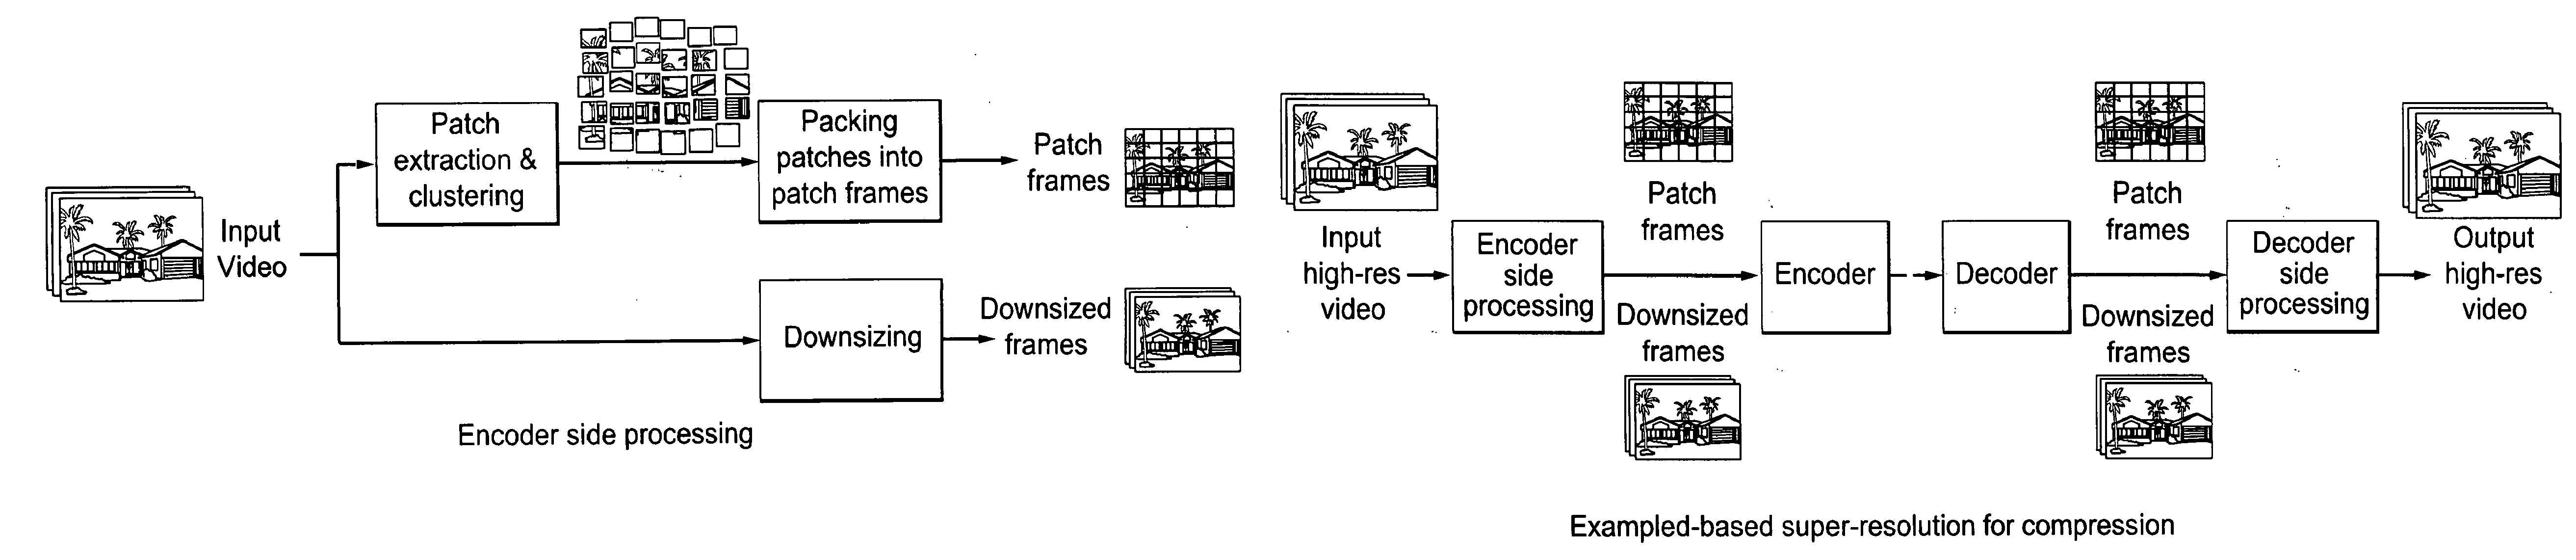 Data pruning for video compression using example-based super-resolution